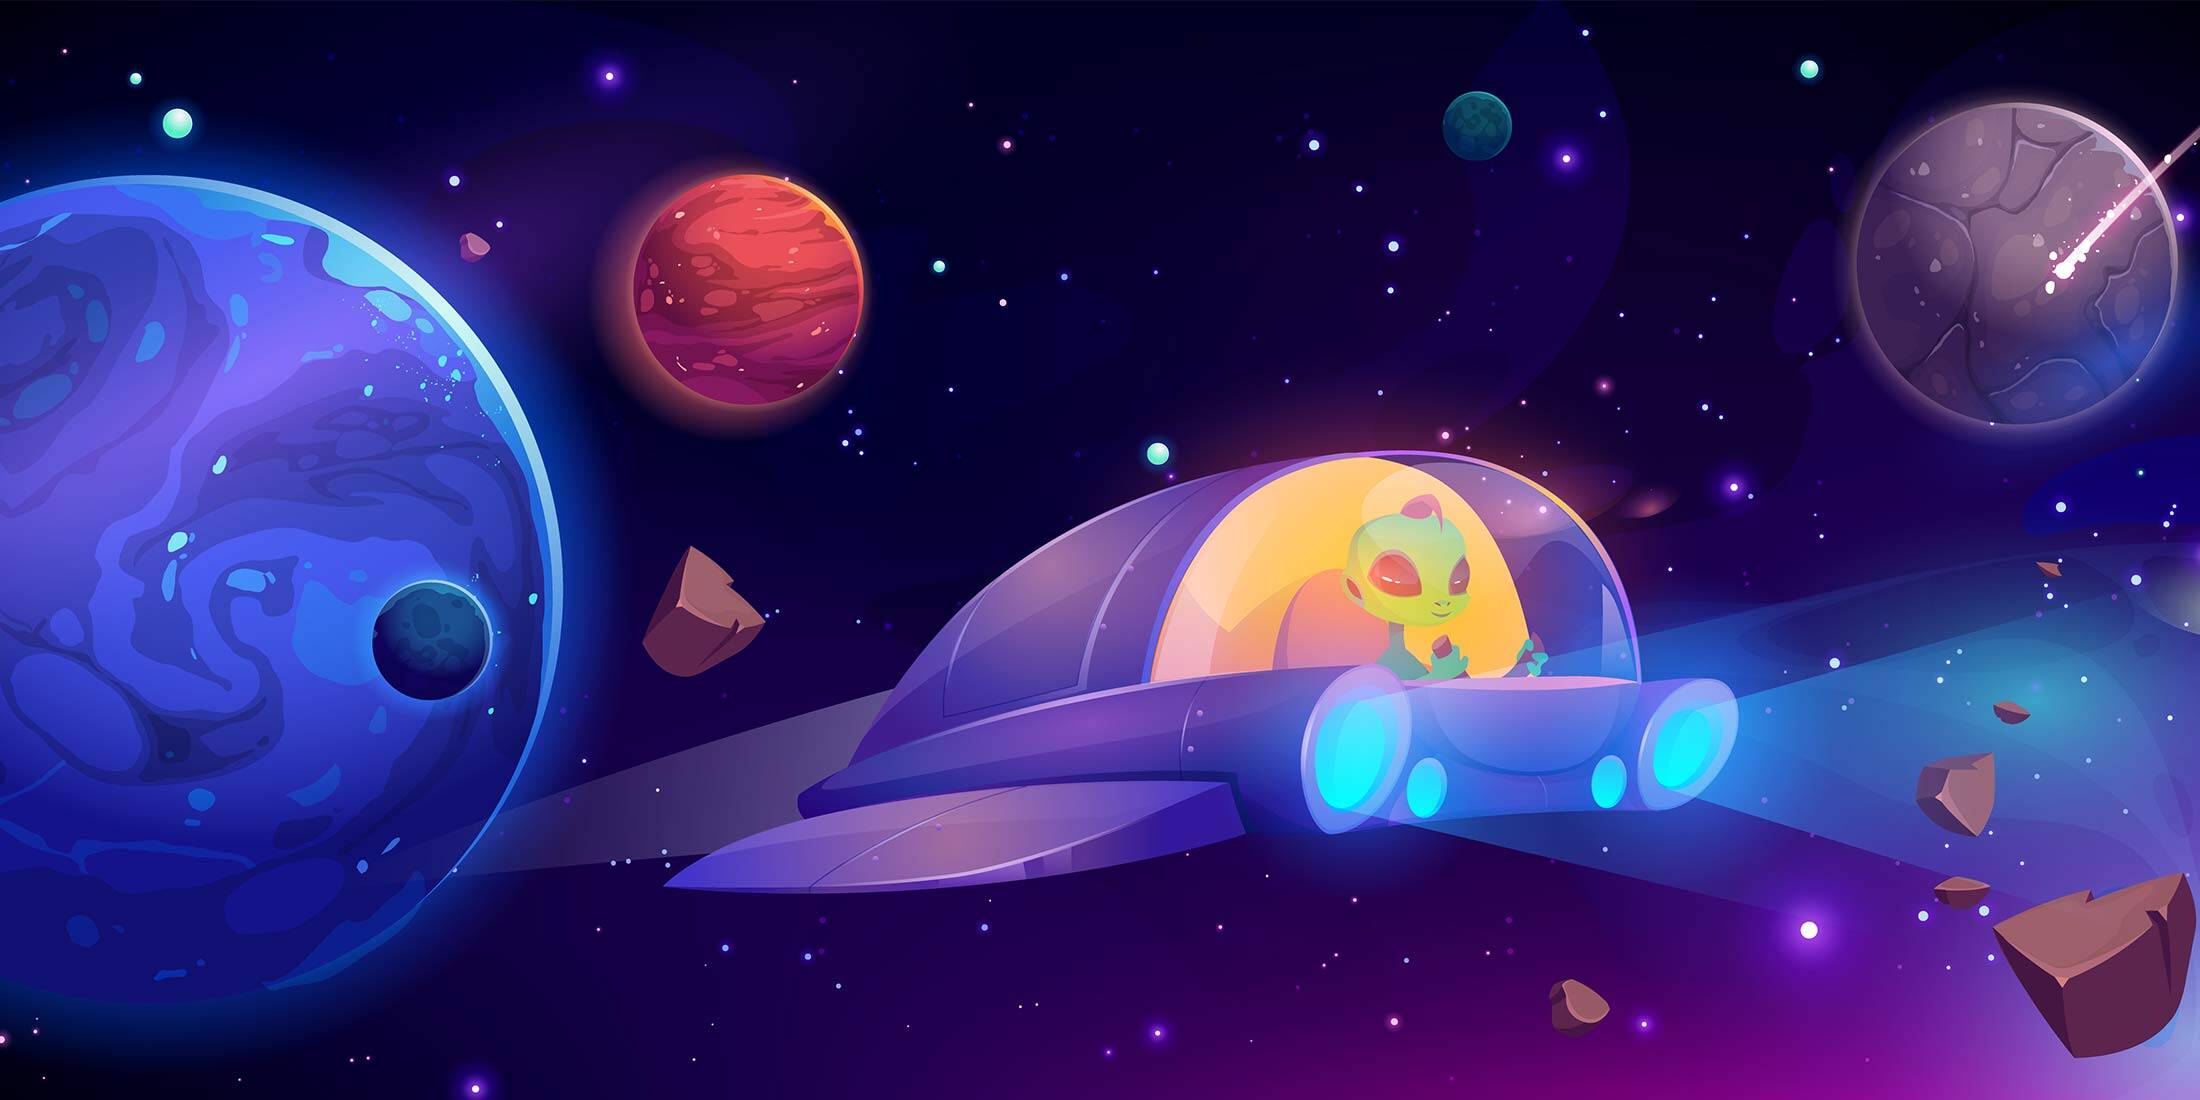 little green alien flying a purple space craft with colorful astroids and planets in the backgroud